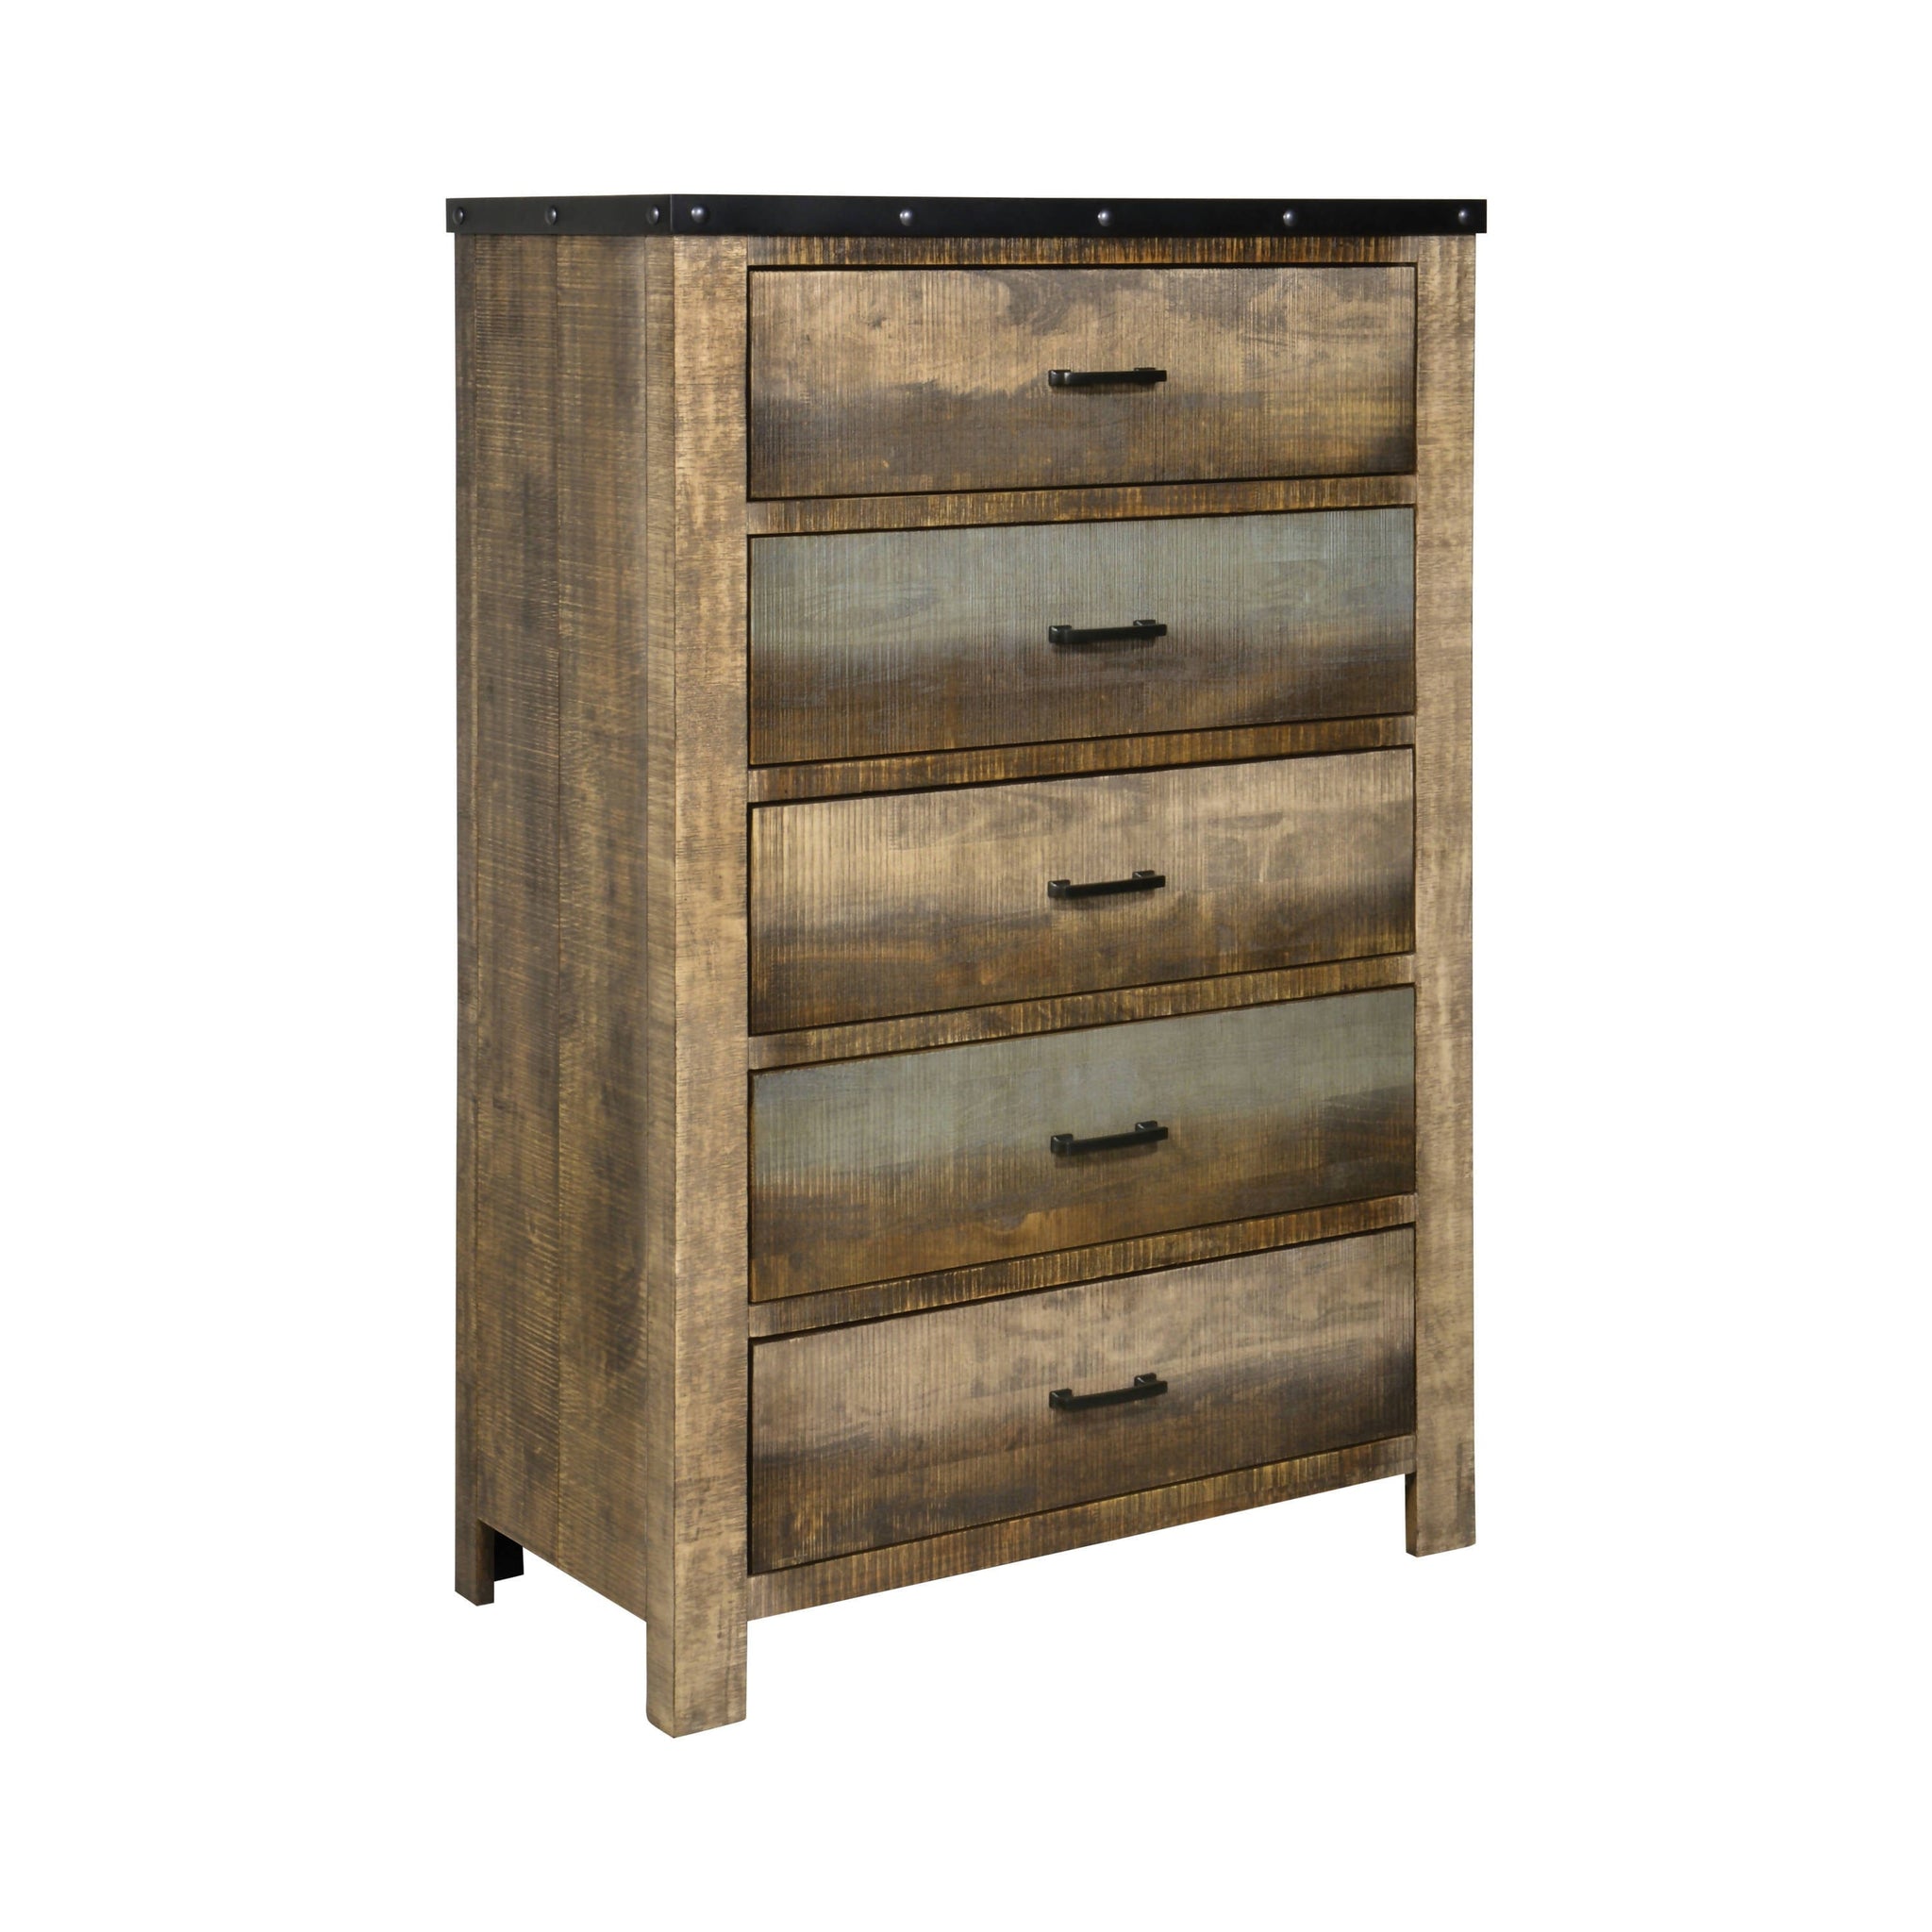 Sembene 5-Drawer Chest Antique Multi-Color Collection: You'll Love The Design Of This Chest, With Five Spacious Drawers, It Offers Ample Storage Space To Keep Your Room Organized.  SKU: 205095